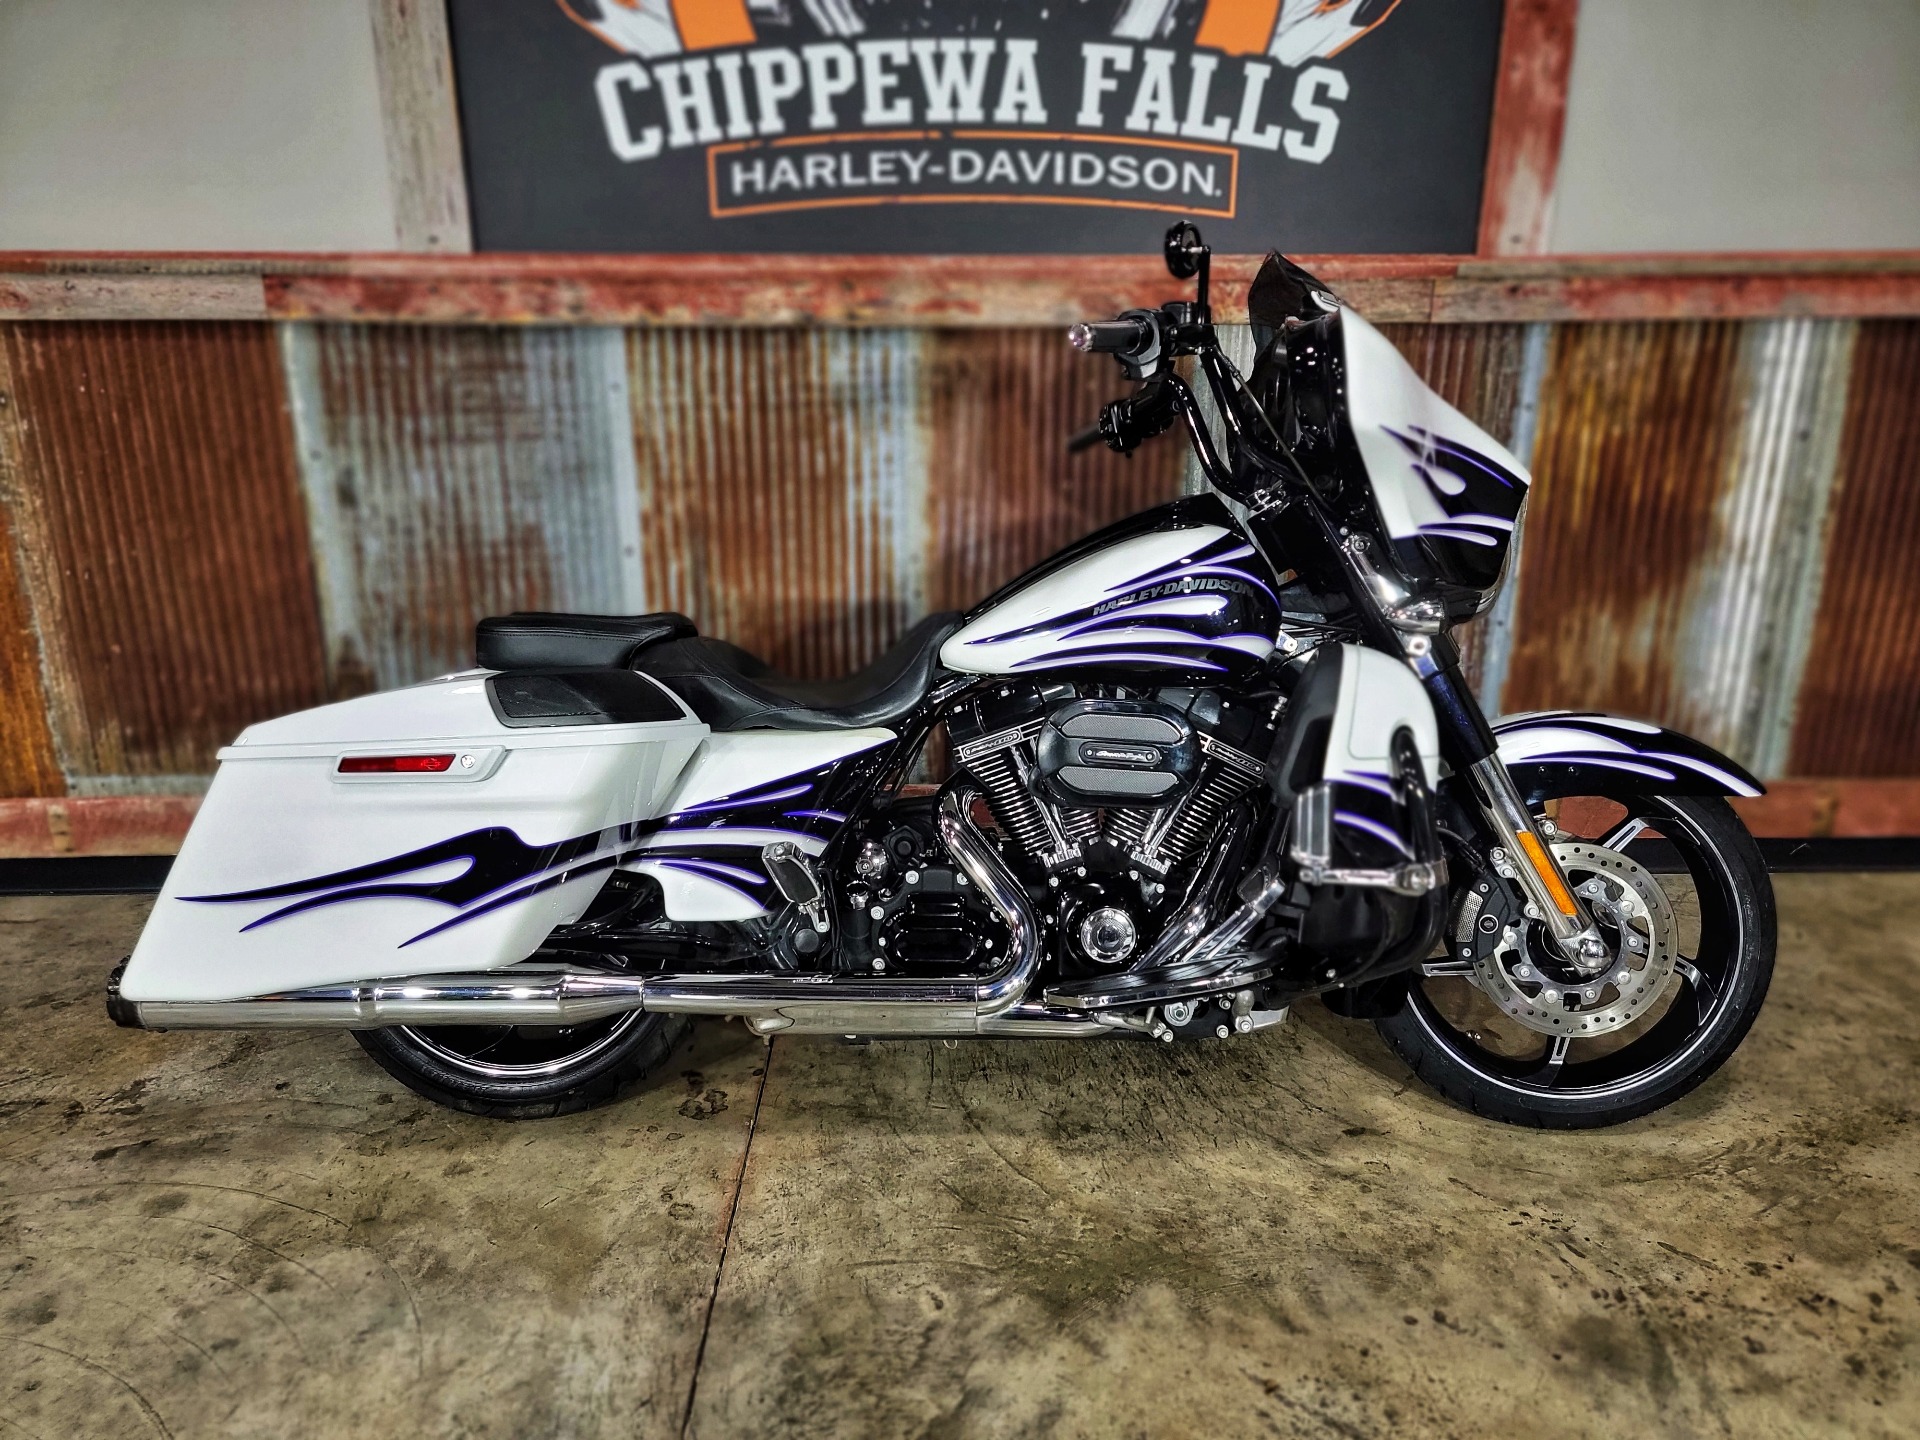 Used 2016 Harley Davidson Cvo Street Glide White Amethyst With Black Licorice Flames Motorcycles In Chippewa Falls Wi B0596